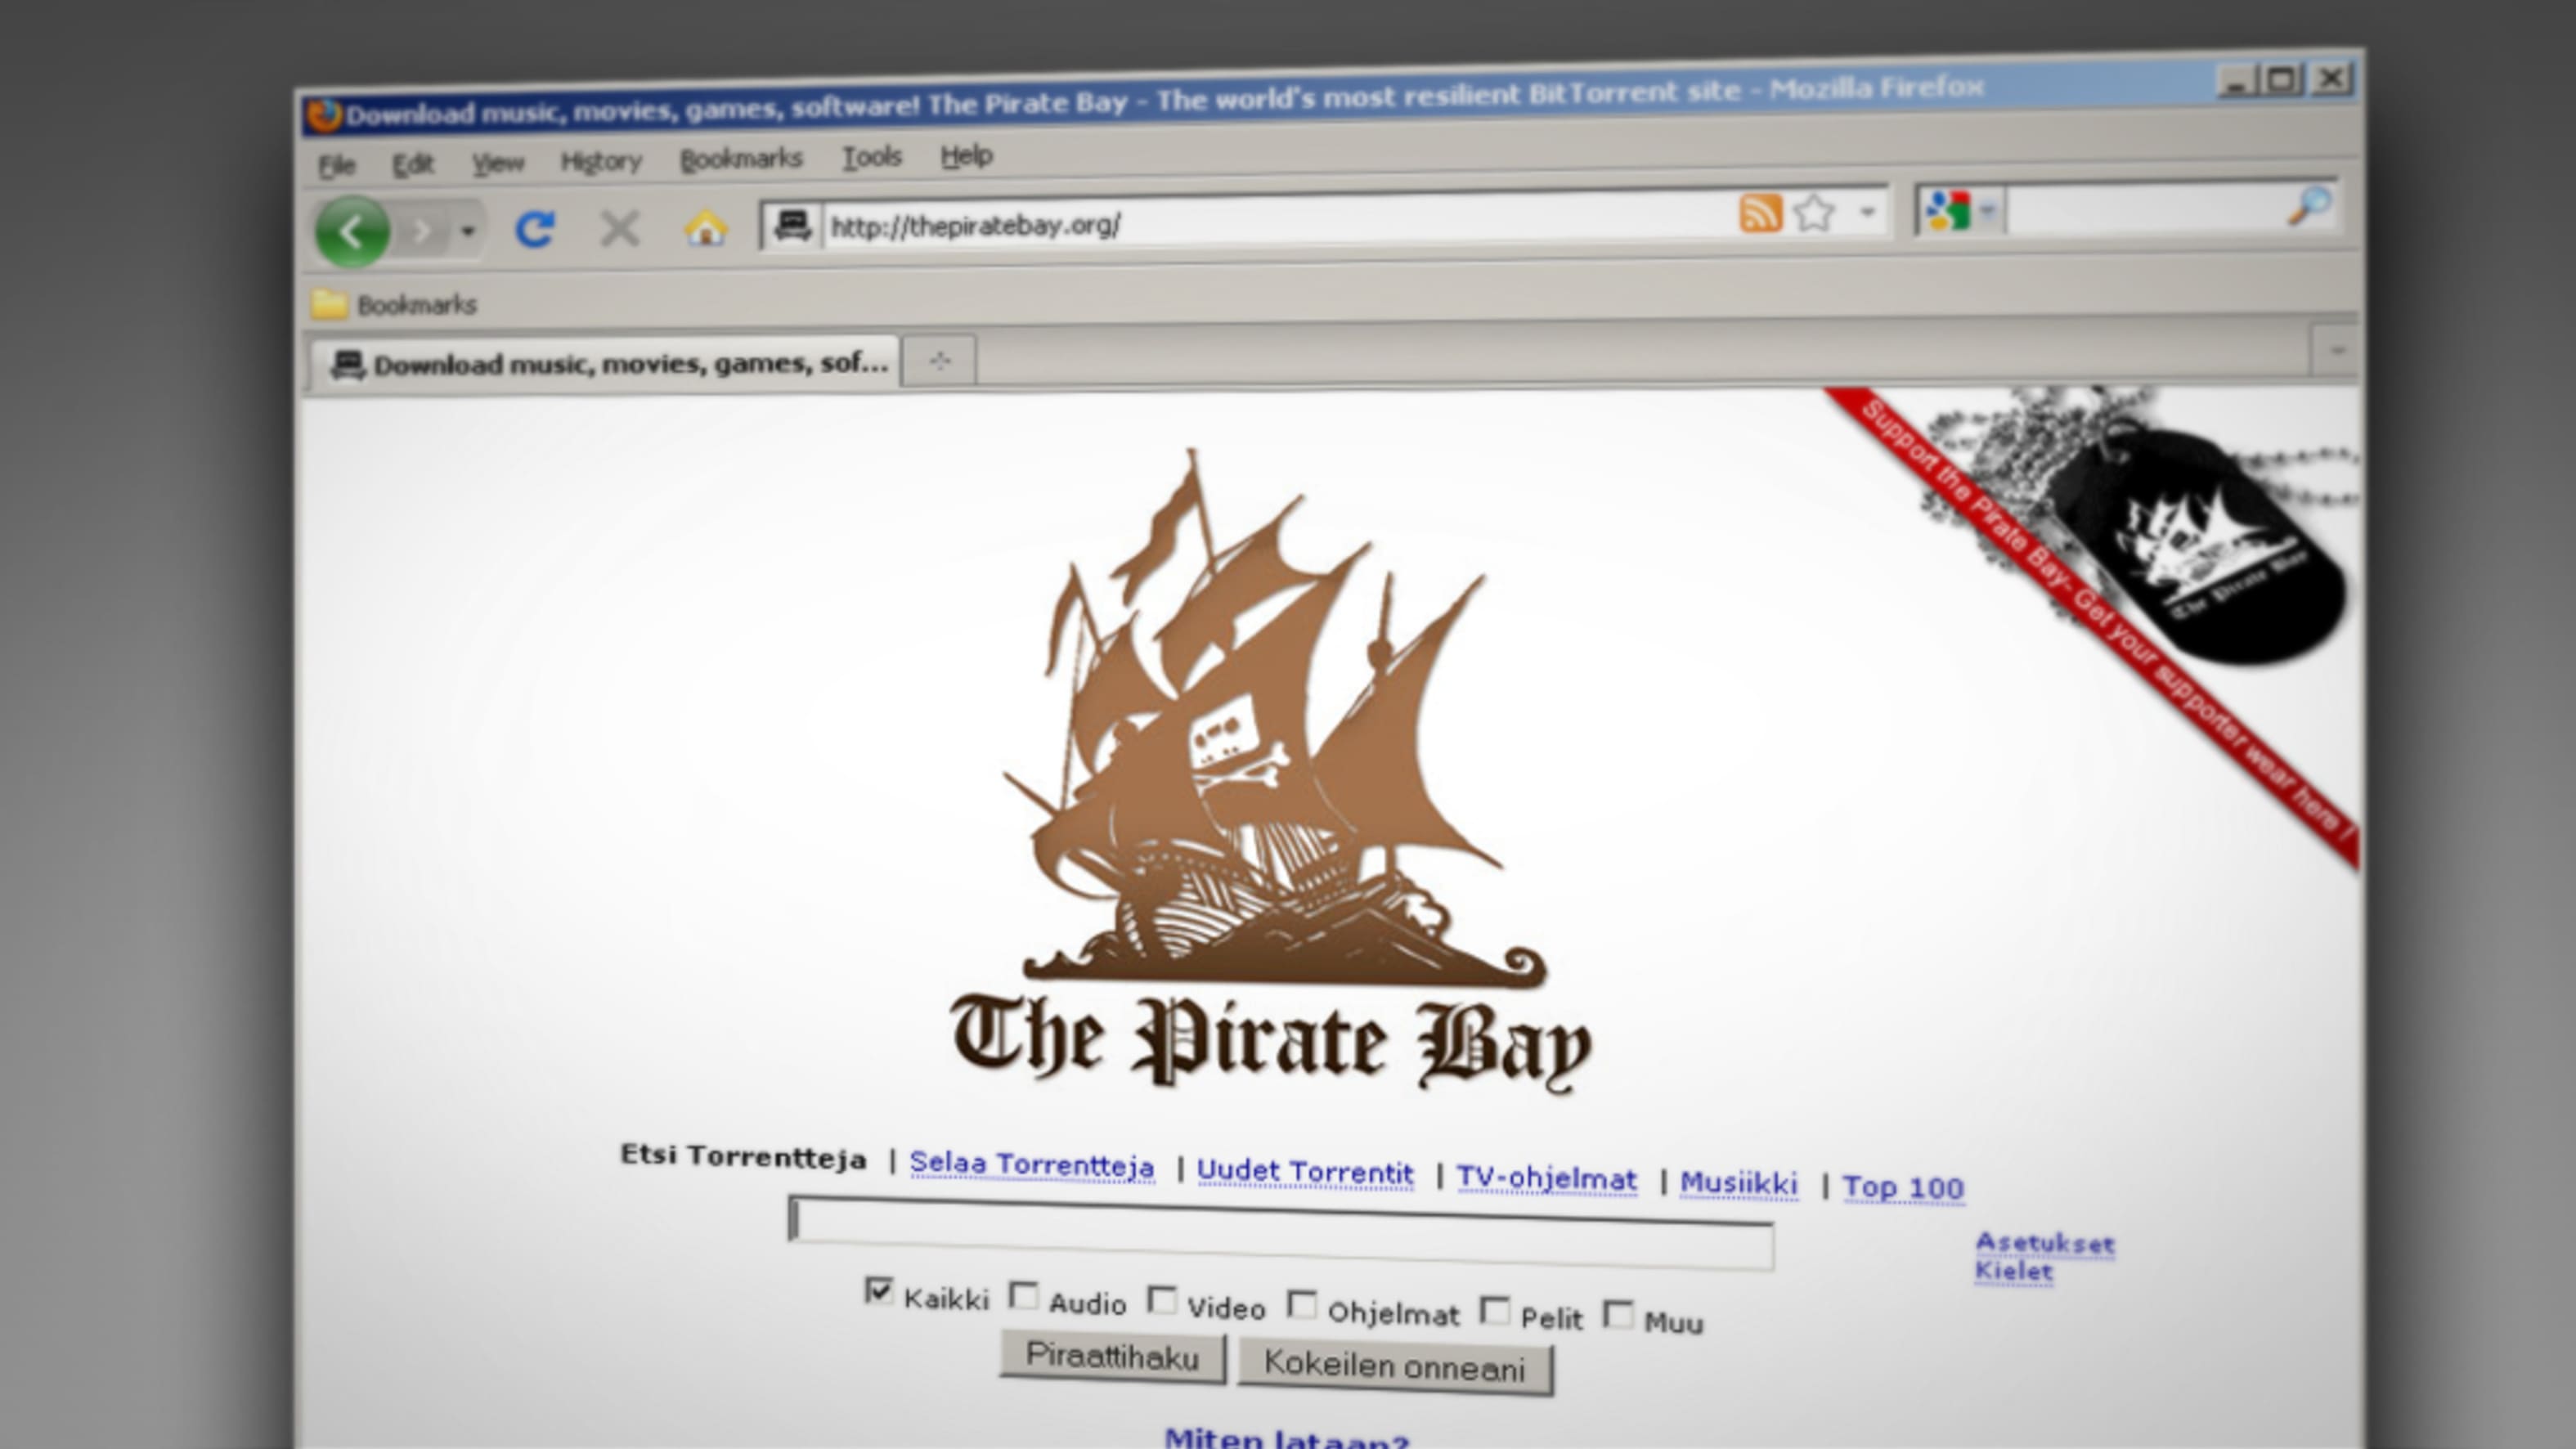 Game over for torrents? The Pirate Bay to be blocked, EU court rules